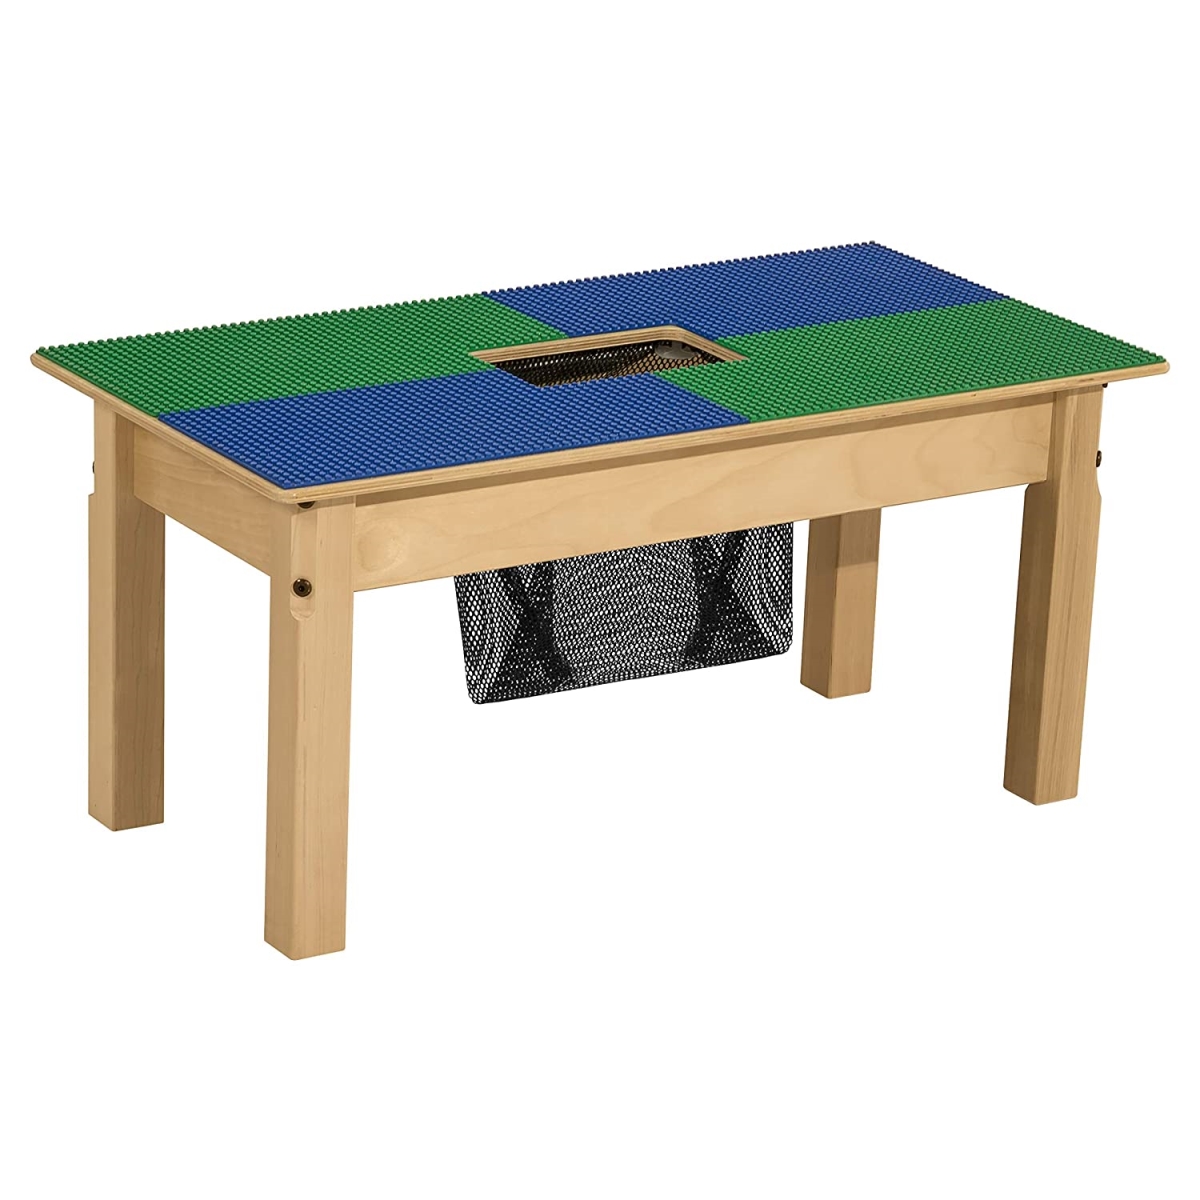 Tp1631sgna1217-bg 12-17 In. Lego Compatible Table With Adjustable Legs, Blue & Green - Rectangle